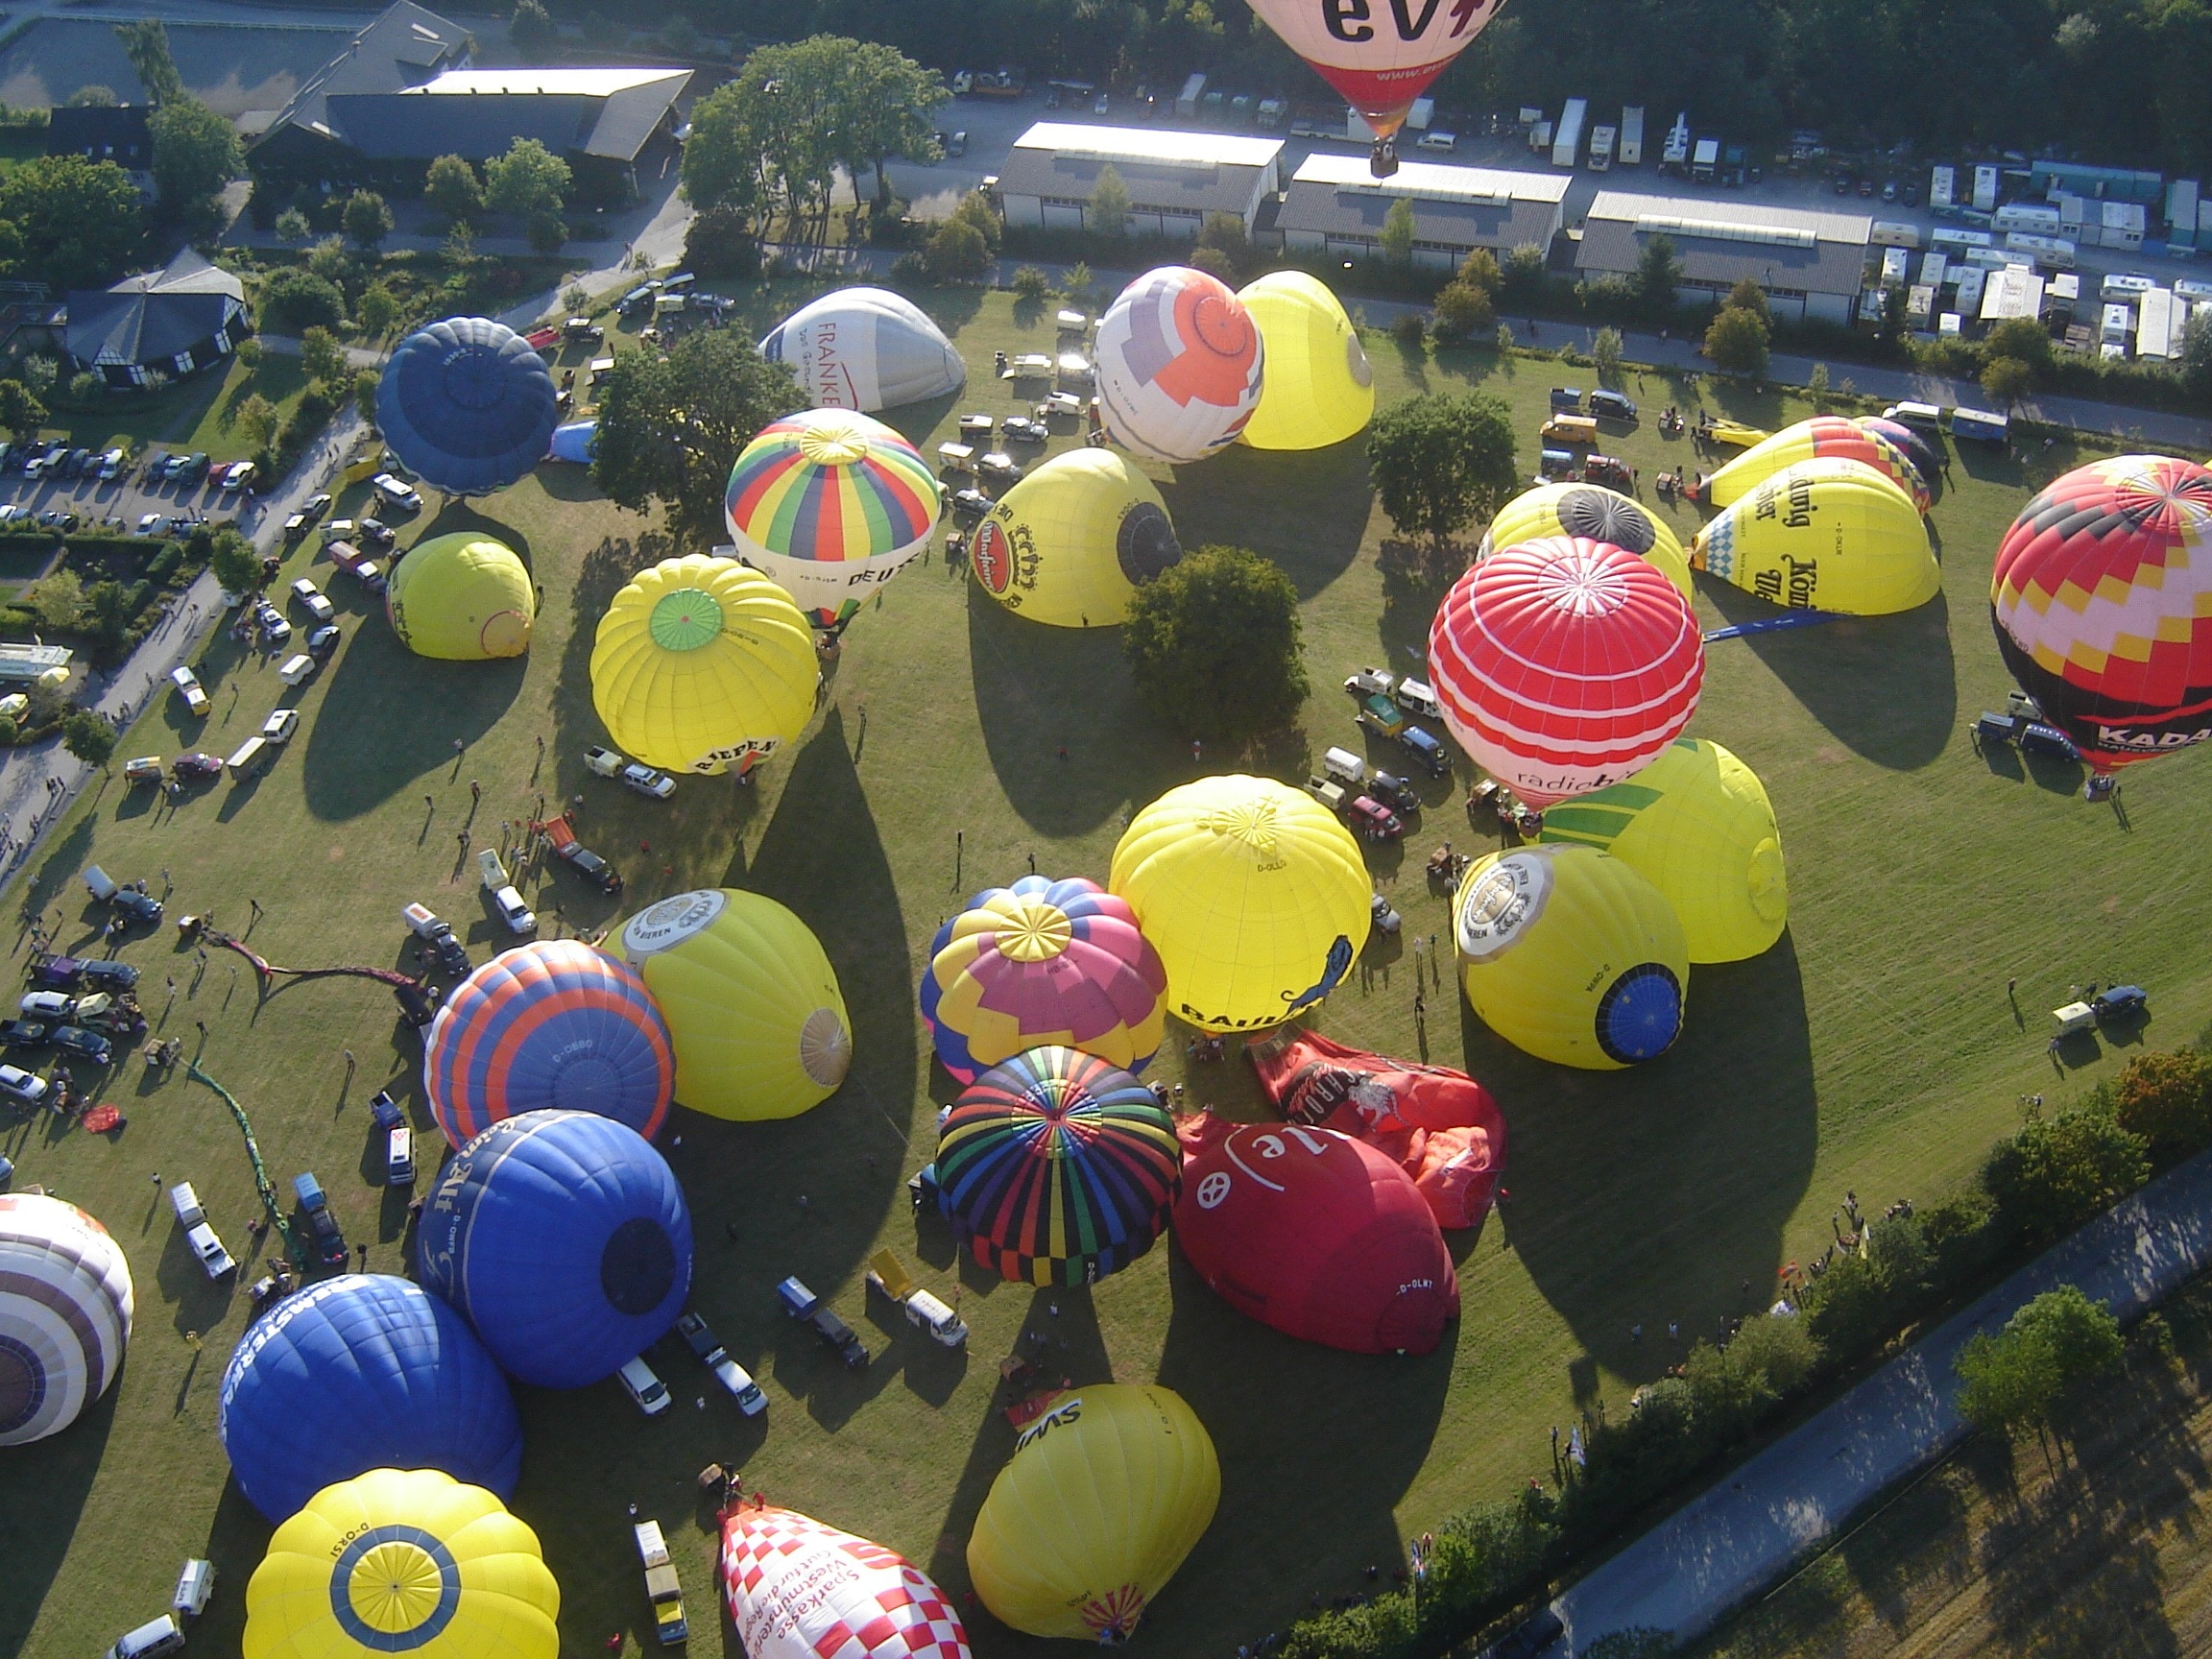 photo of hot air balloons and people on the open ground from top view